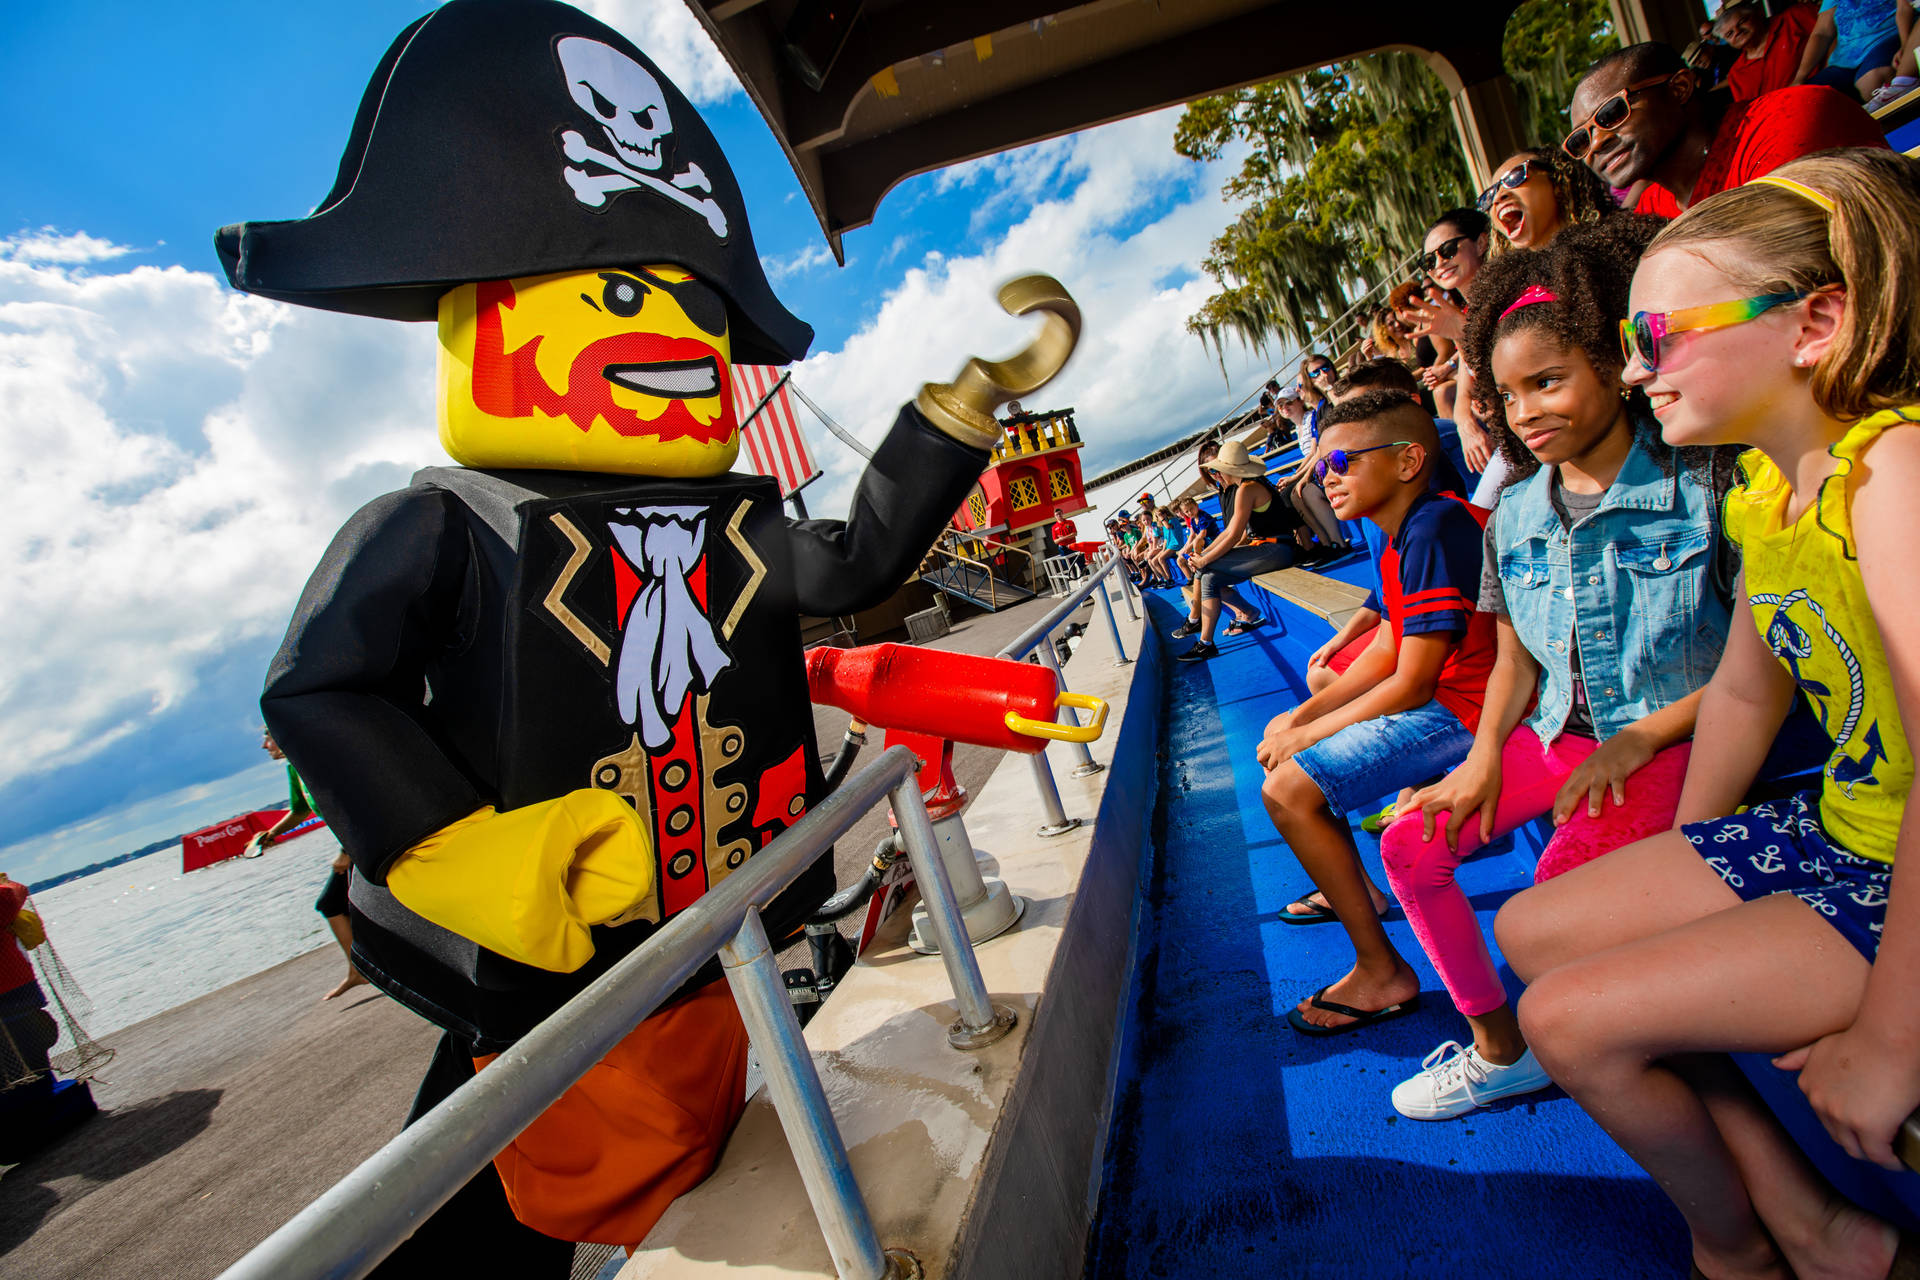 Exciting Adventure at the Pirate Section of LEGOLAND Wallpaper